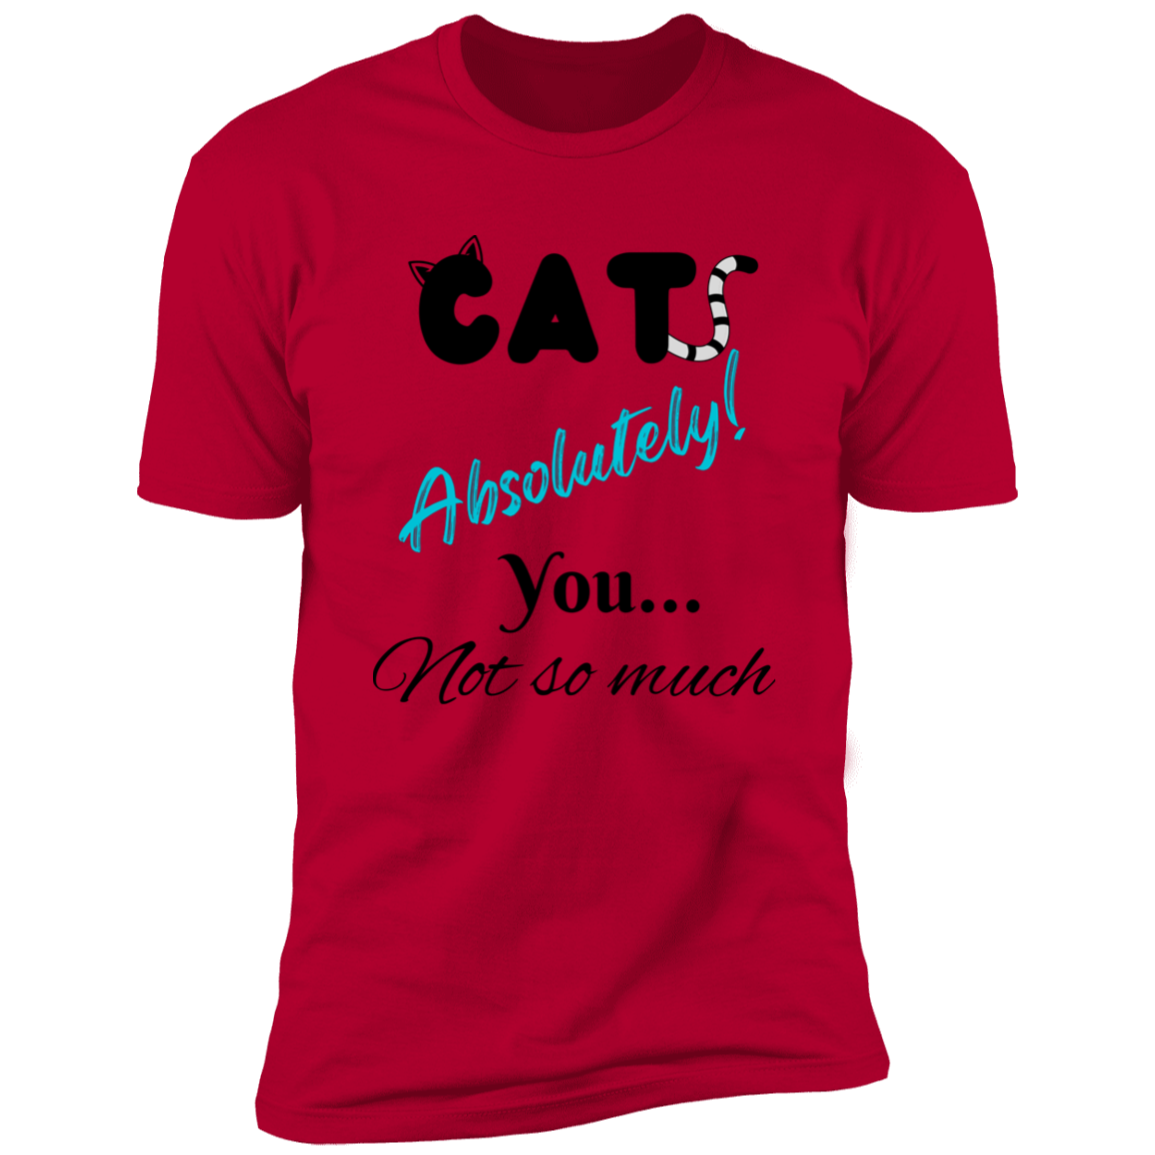 Cats Absolutely You Not So Much T-shirt, Cat Shirt for humans , in red